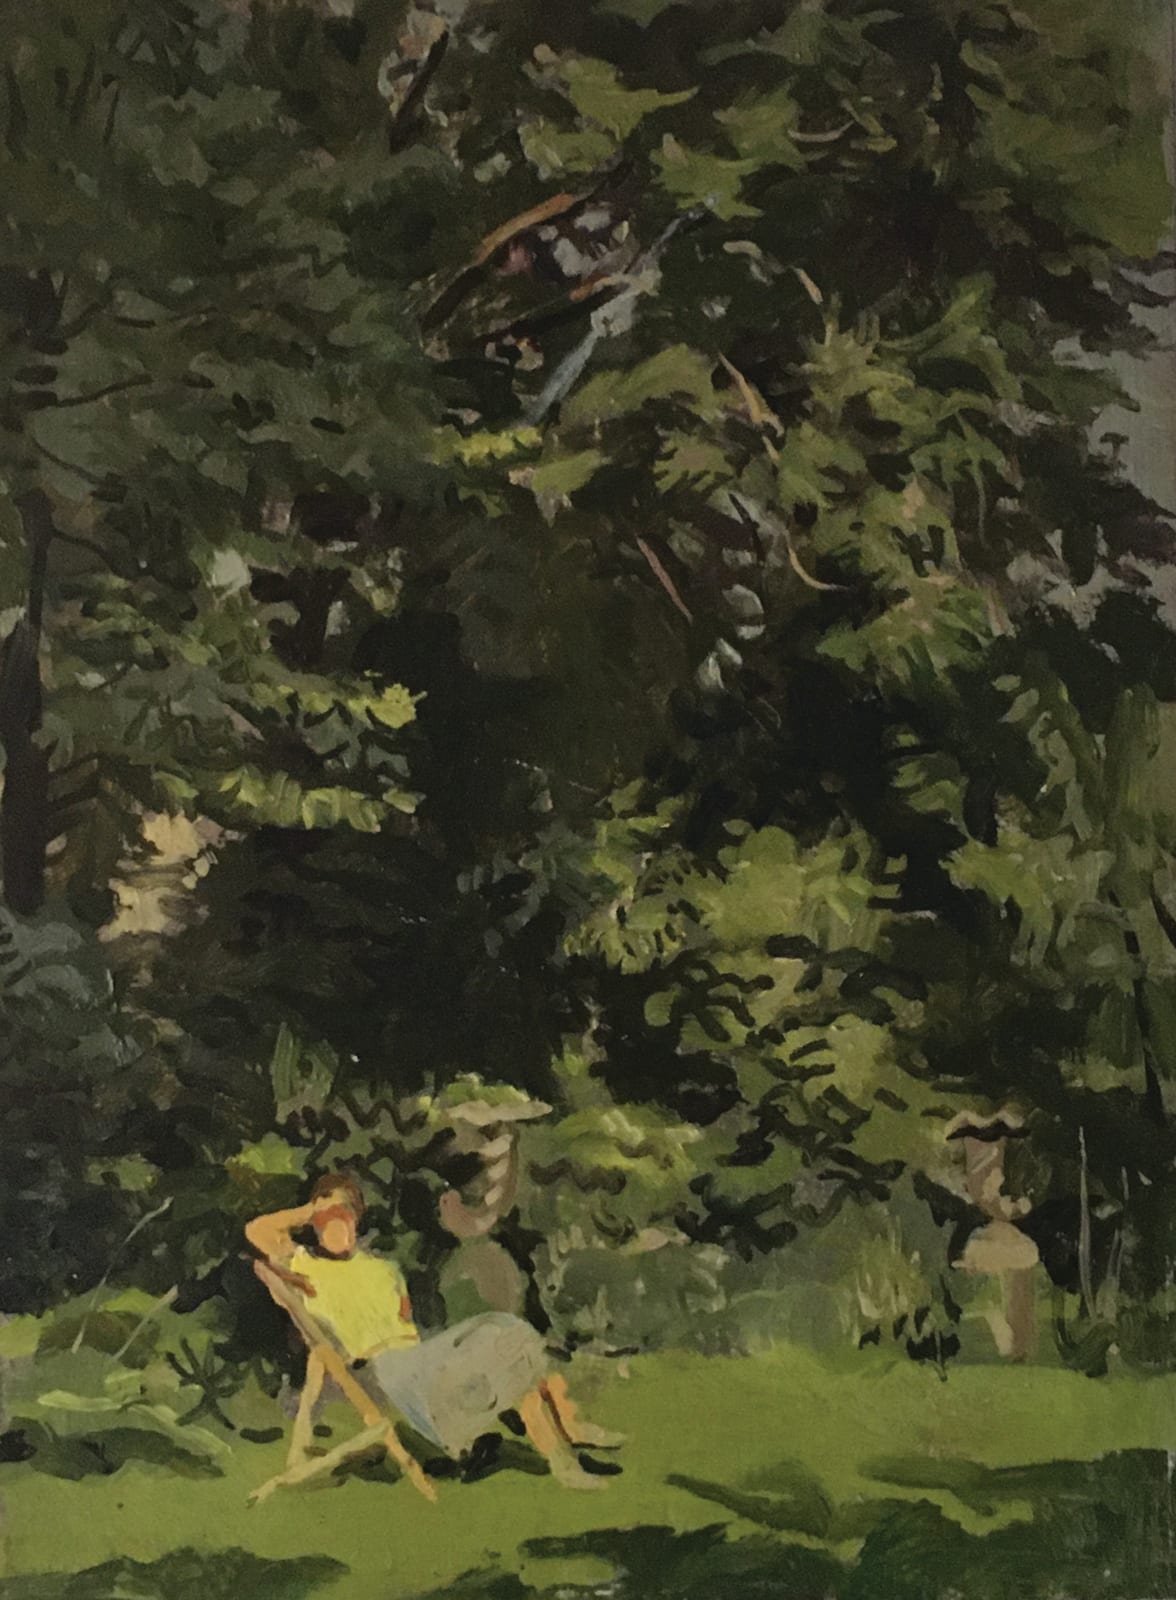 Stephen Bone, Holiday at Home - Mary Adshead in the garden at Hampstead, c. 1947